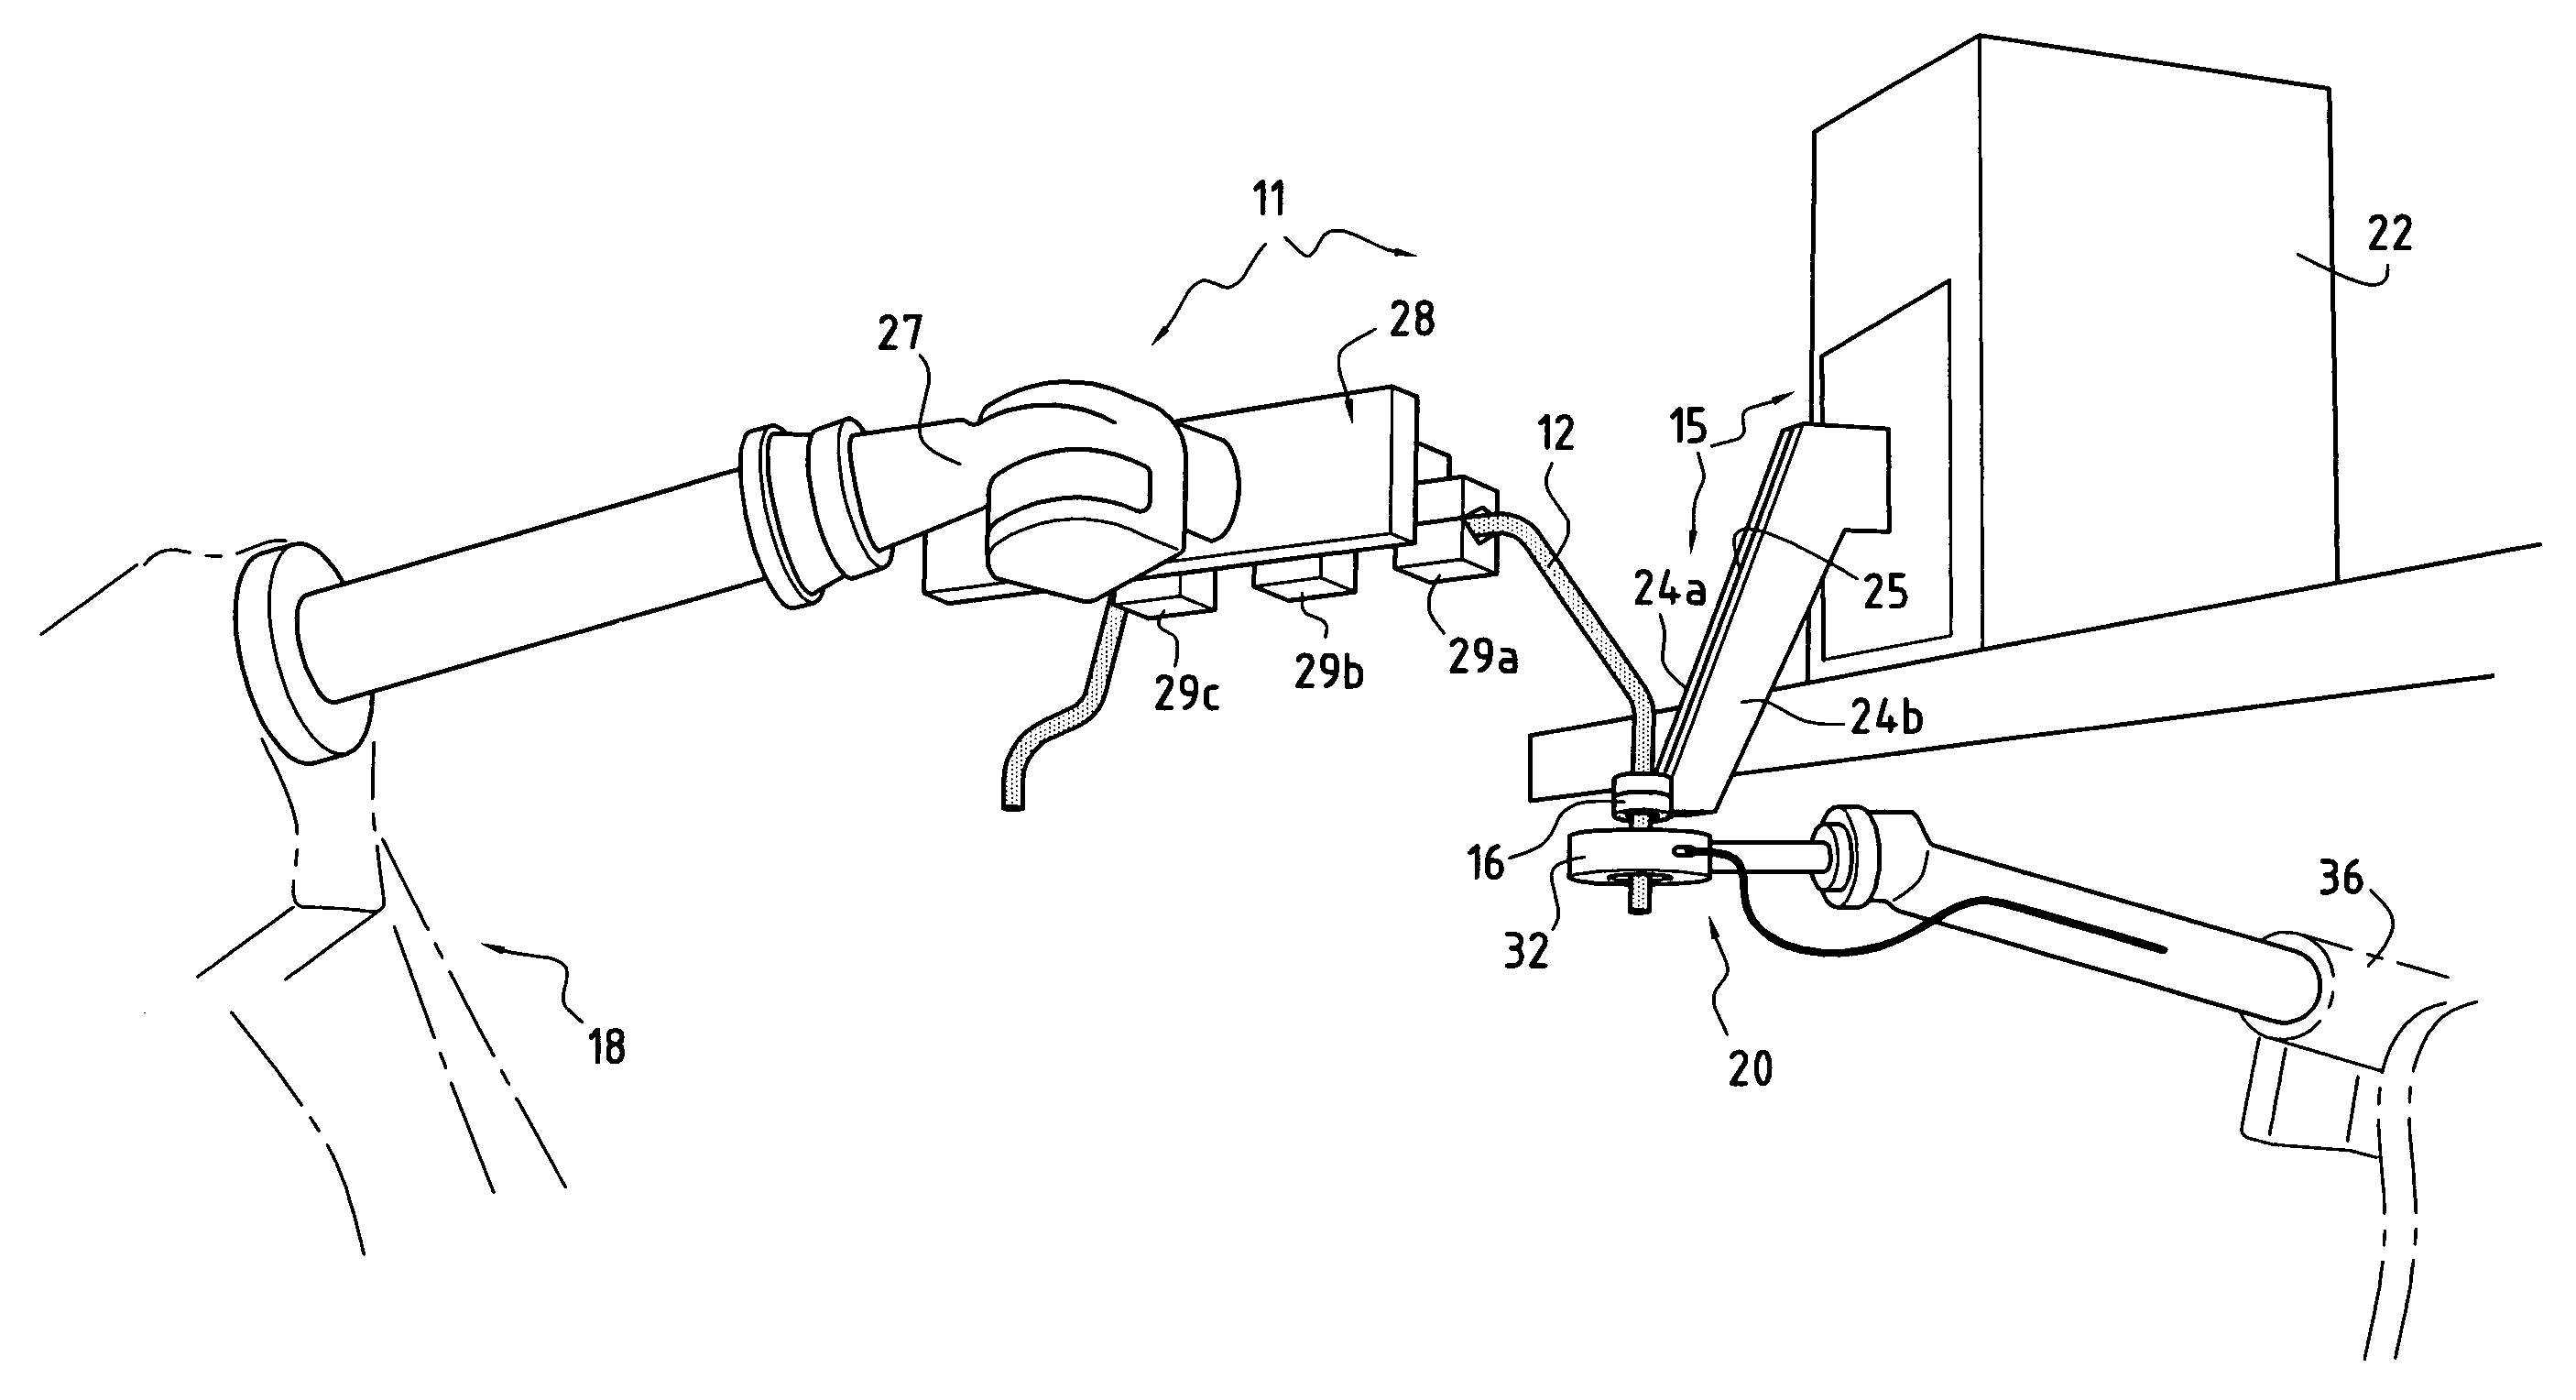 Induction quenching installation, in particular for fabricating suspension components